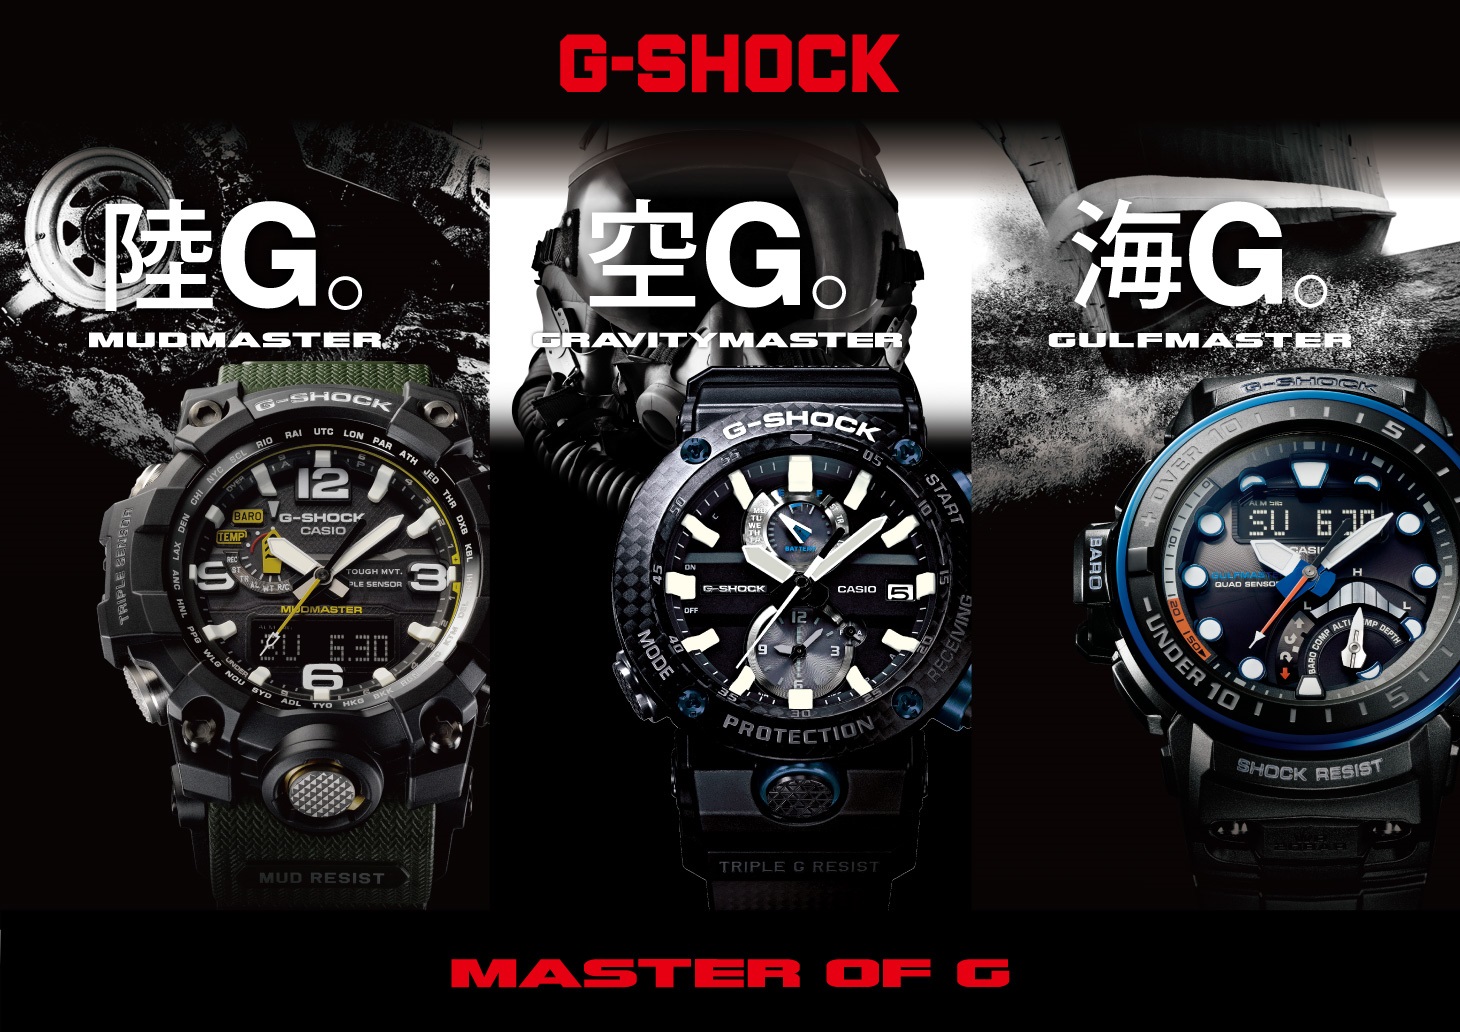 G-SHOCK MASTER OF G フェア